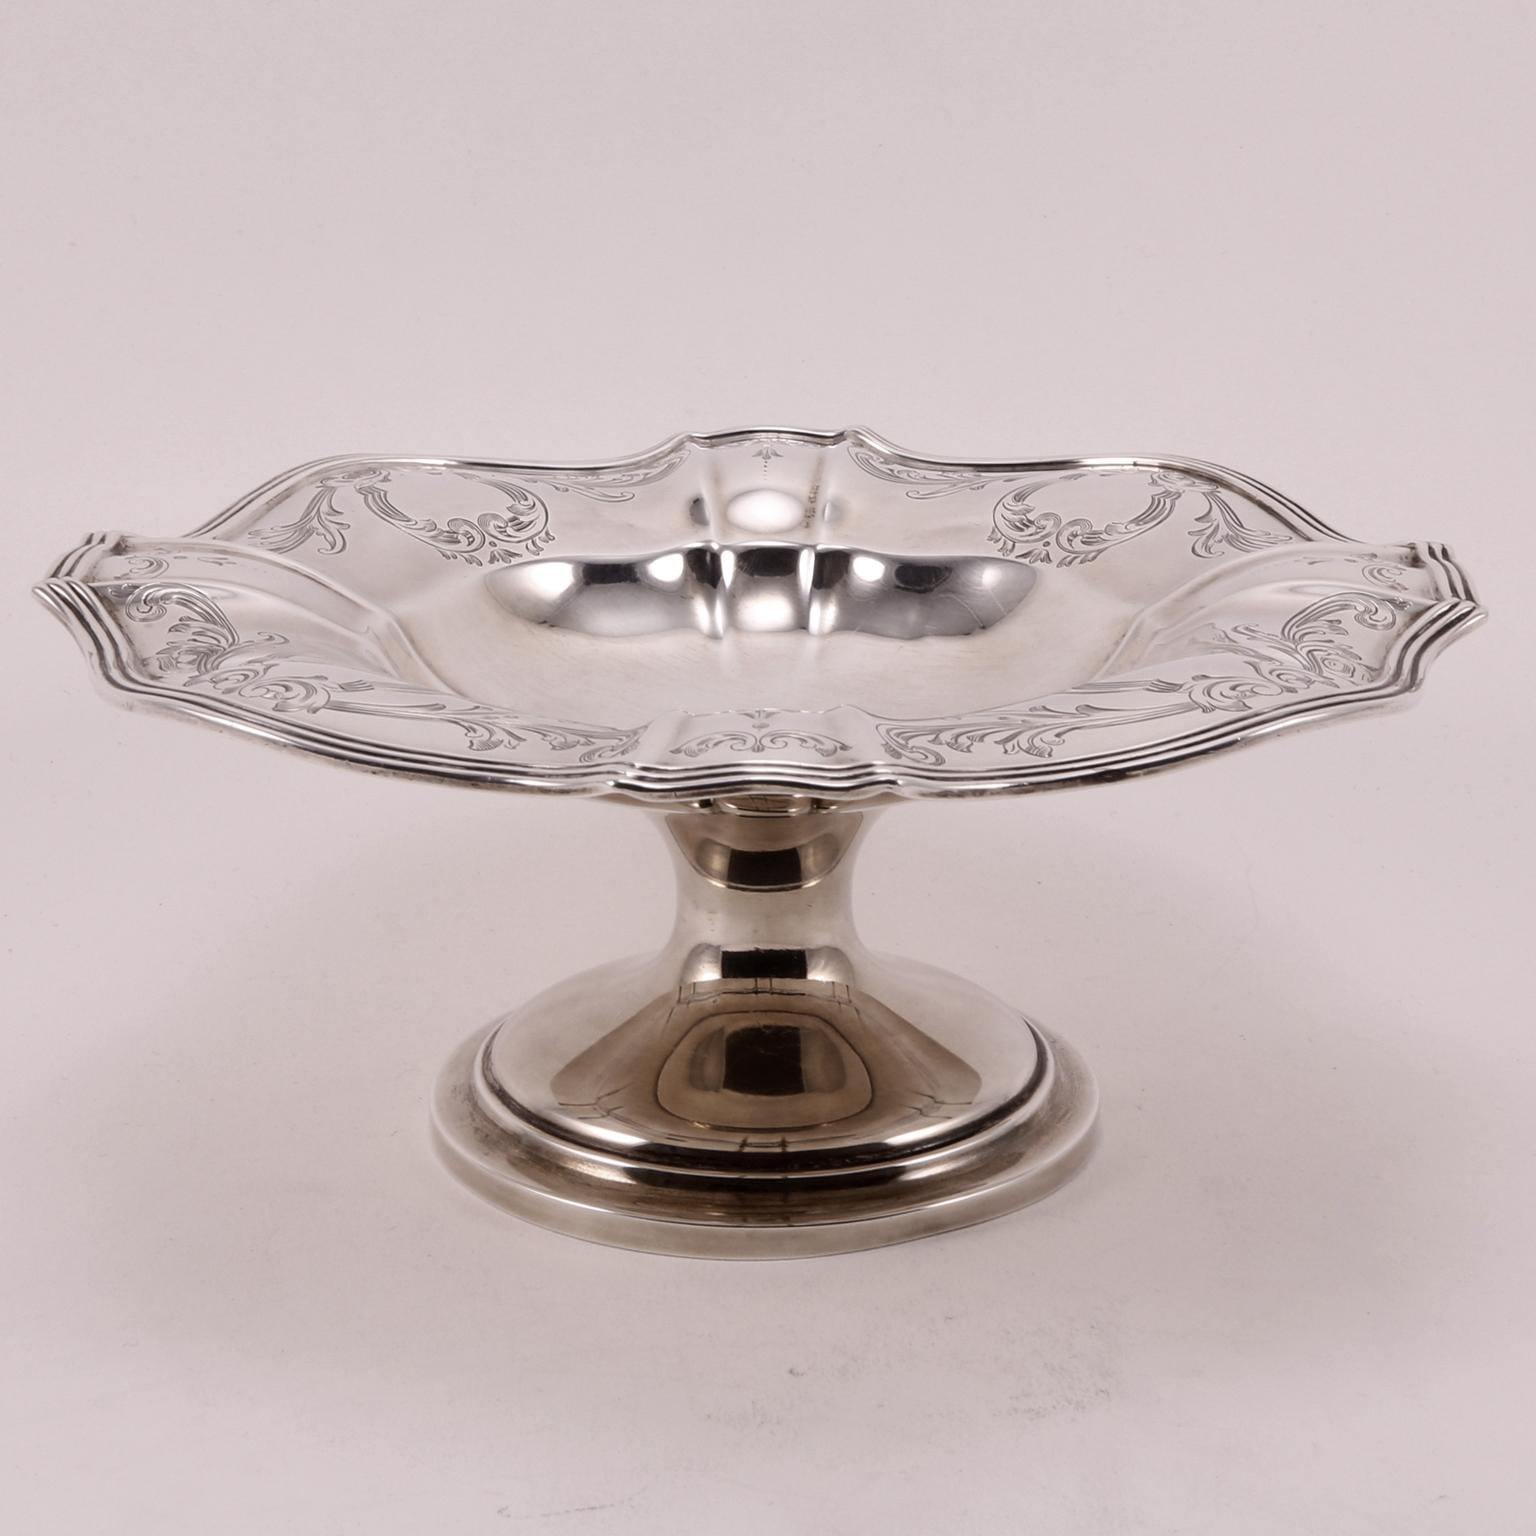 Original hand engraved monogram in the center.
The bowl features an ornate engraved pattern consisting of elegant natural elements.
A flower just blossomed in the morning.
Produced by Gorham Corporation Providence Rhode island 1900.